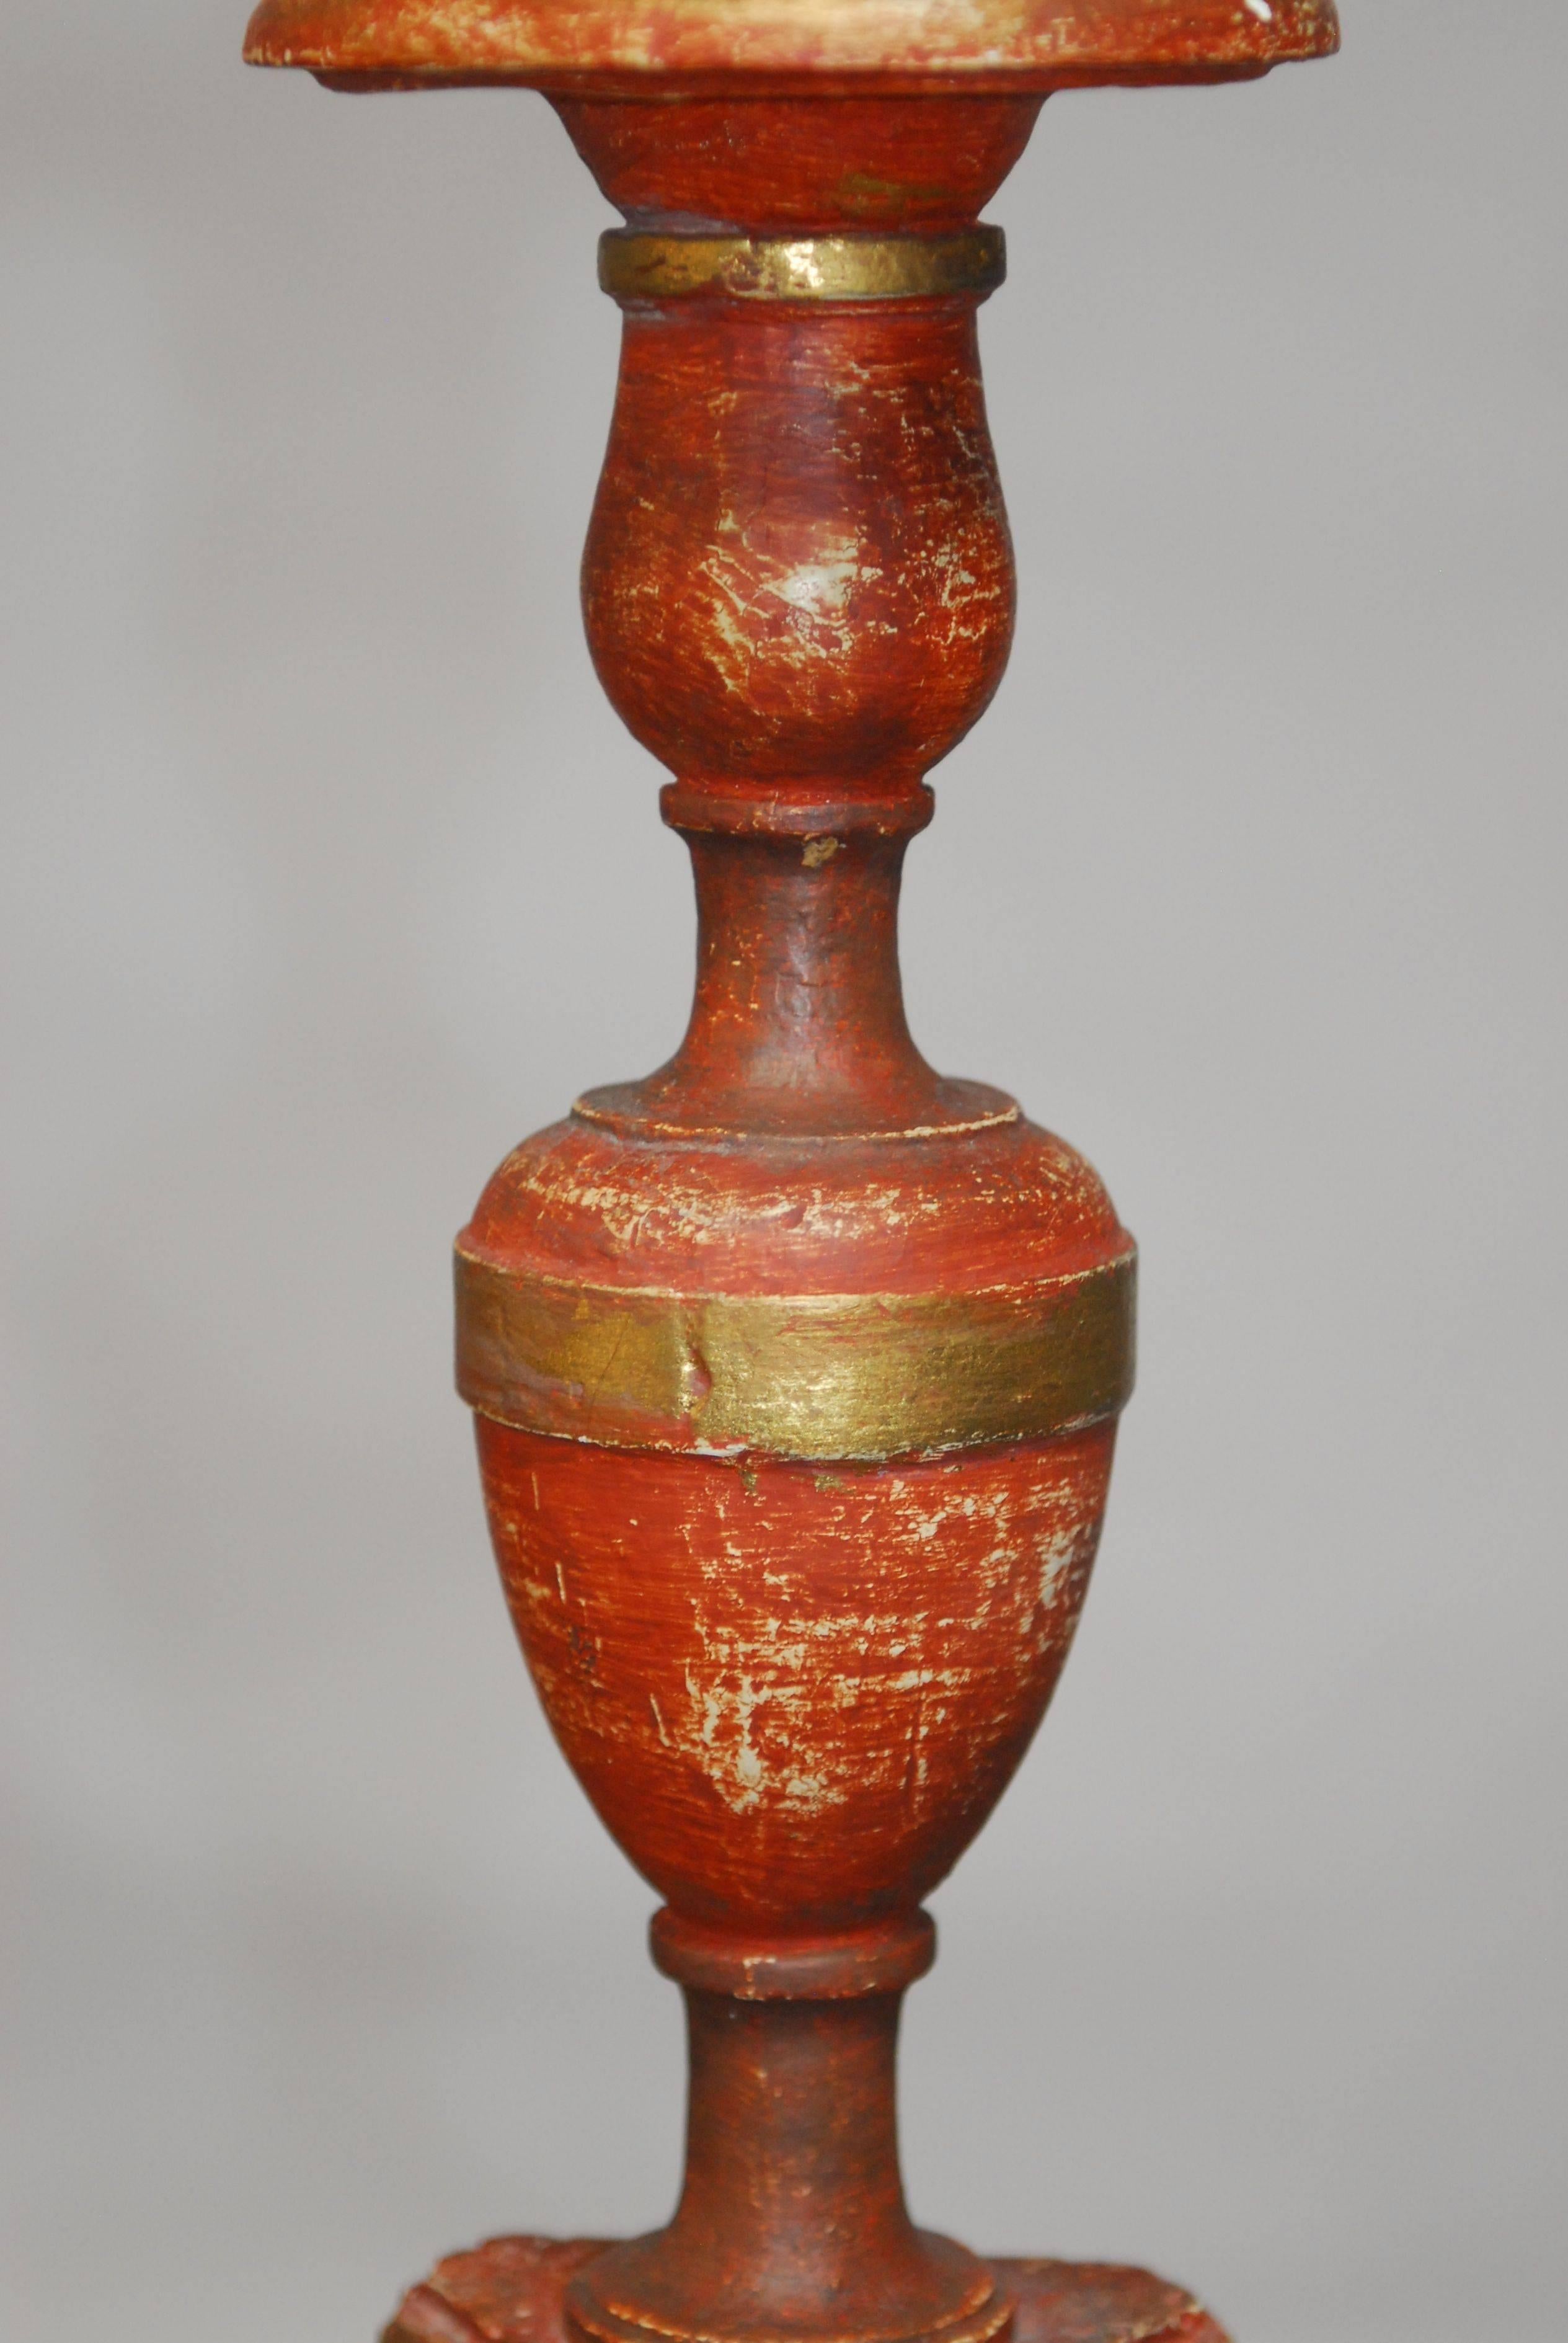 Faux wood Italian altar candlestick made of ceramic and finished in a parcel-gilt polychrome finish. Supported by a tripod footed base. Lovely texture that looks like antique carved wood. Includes a round giltwood finial and no shade.
